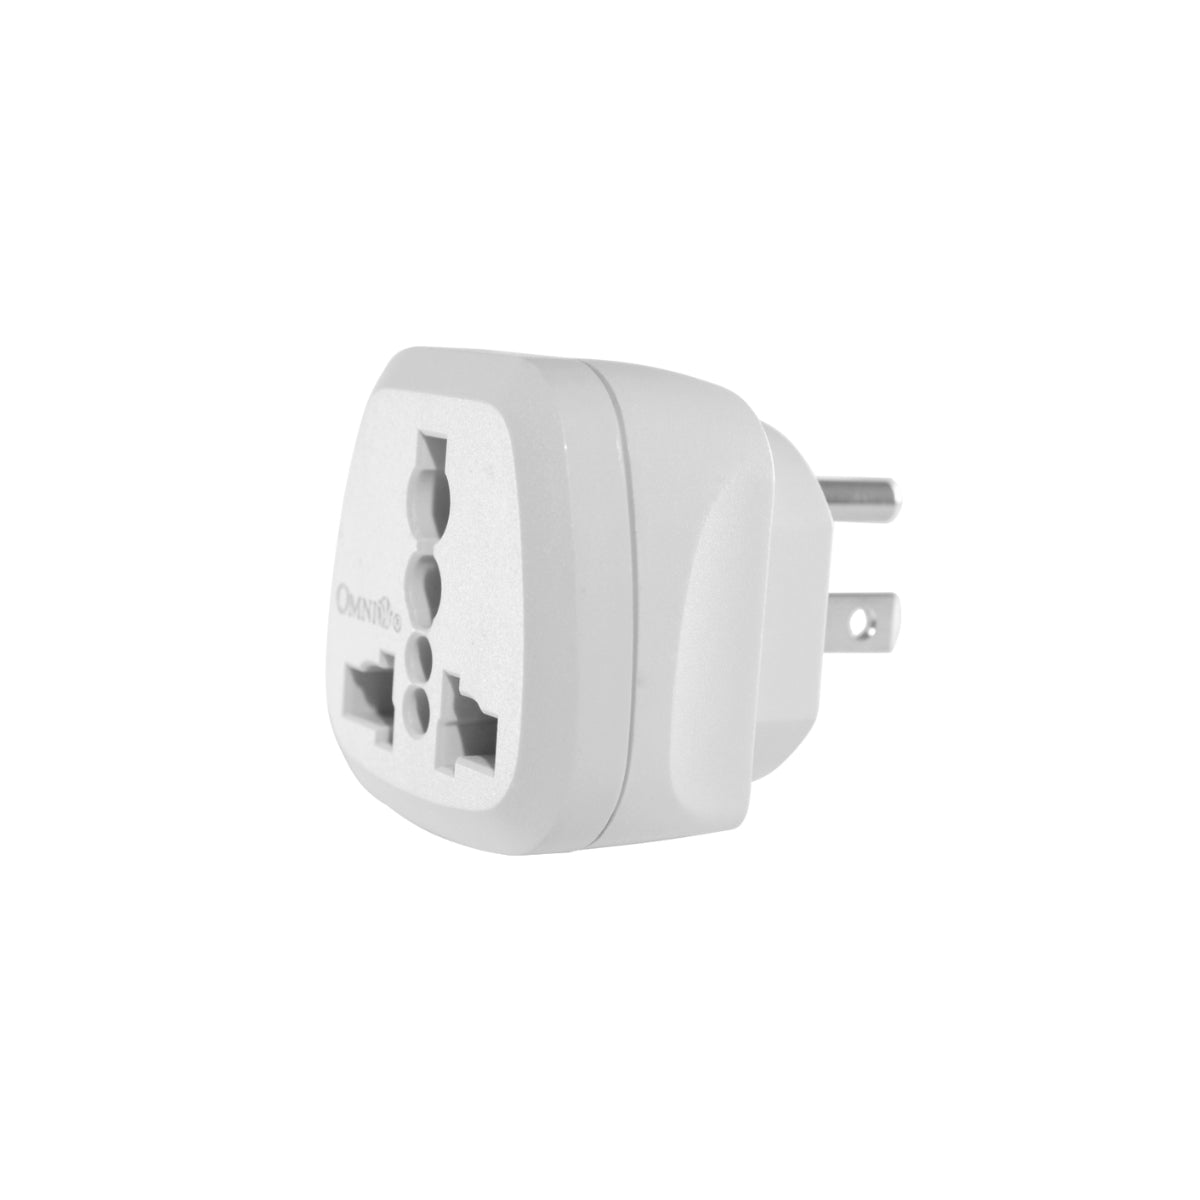 OMNI Universal Adapter with Ground 15A 220V Plug and Outlet for Electronics & Appliances | WUA-003